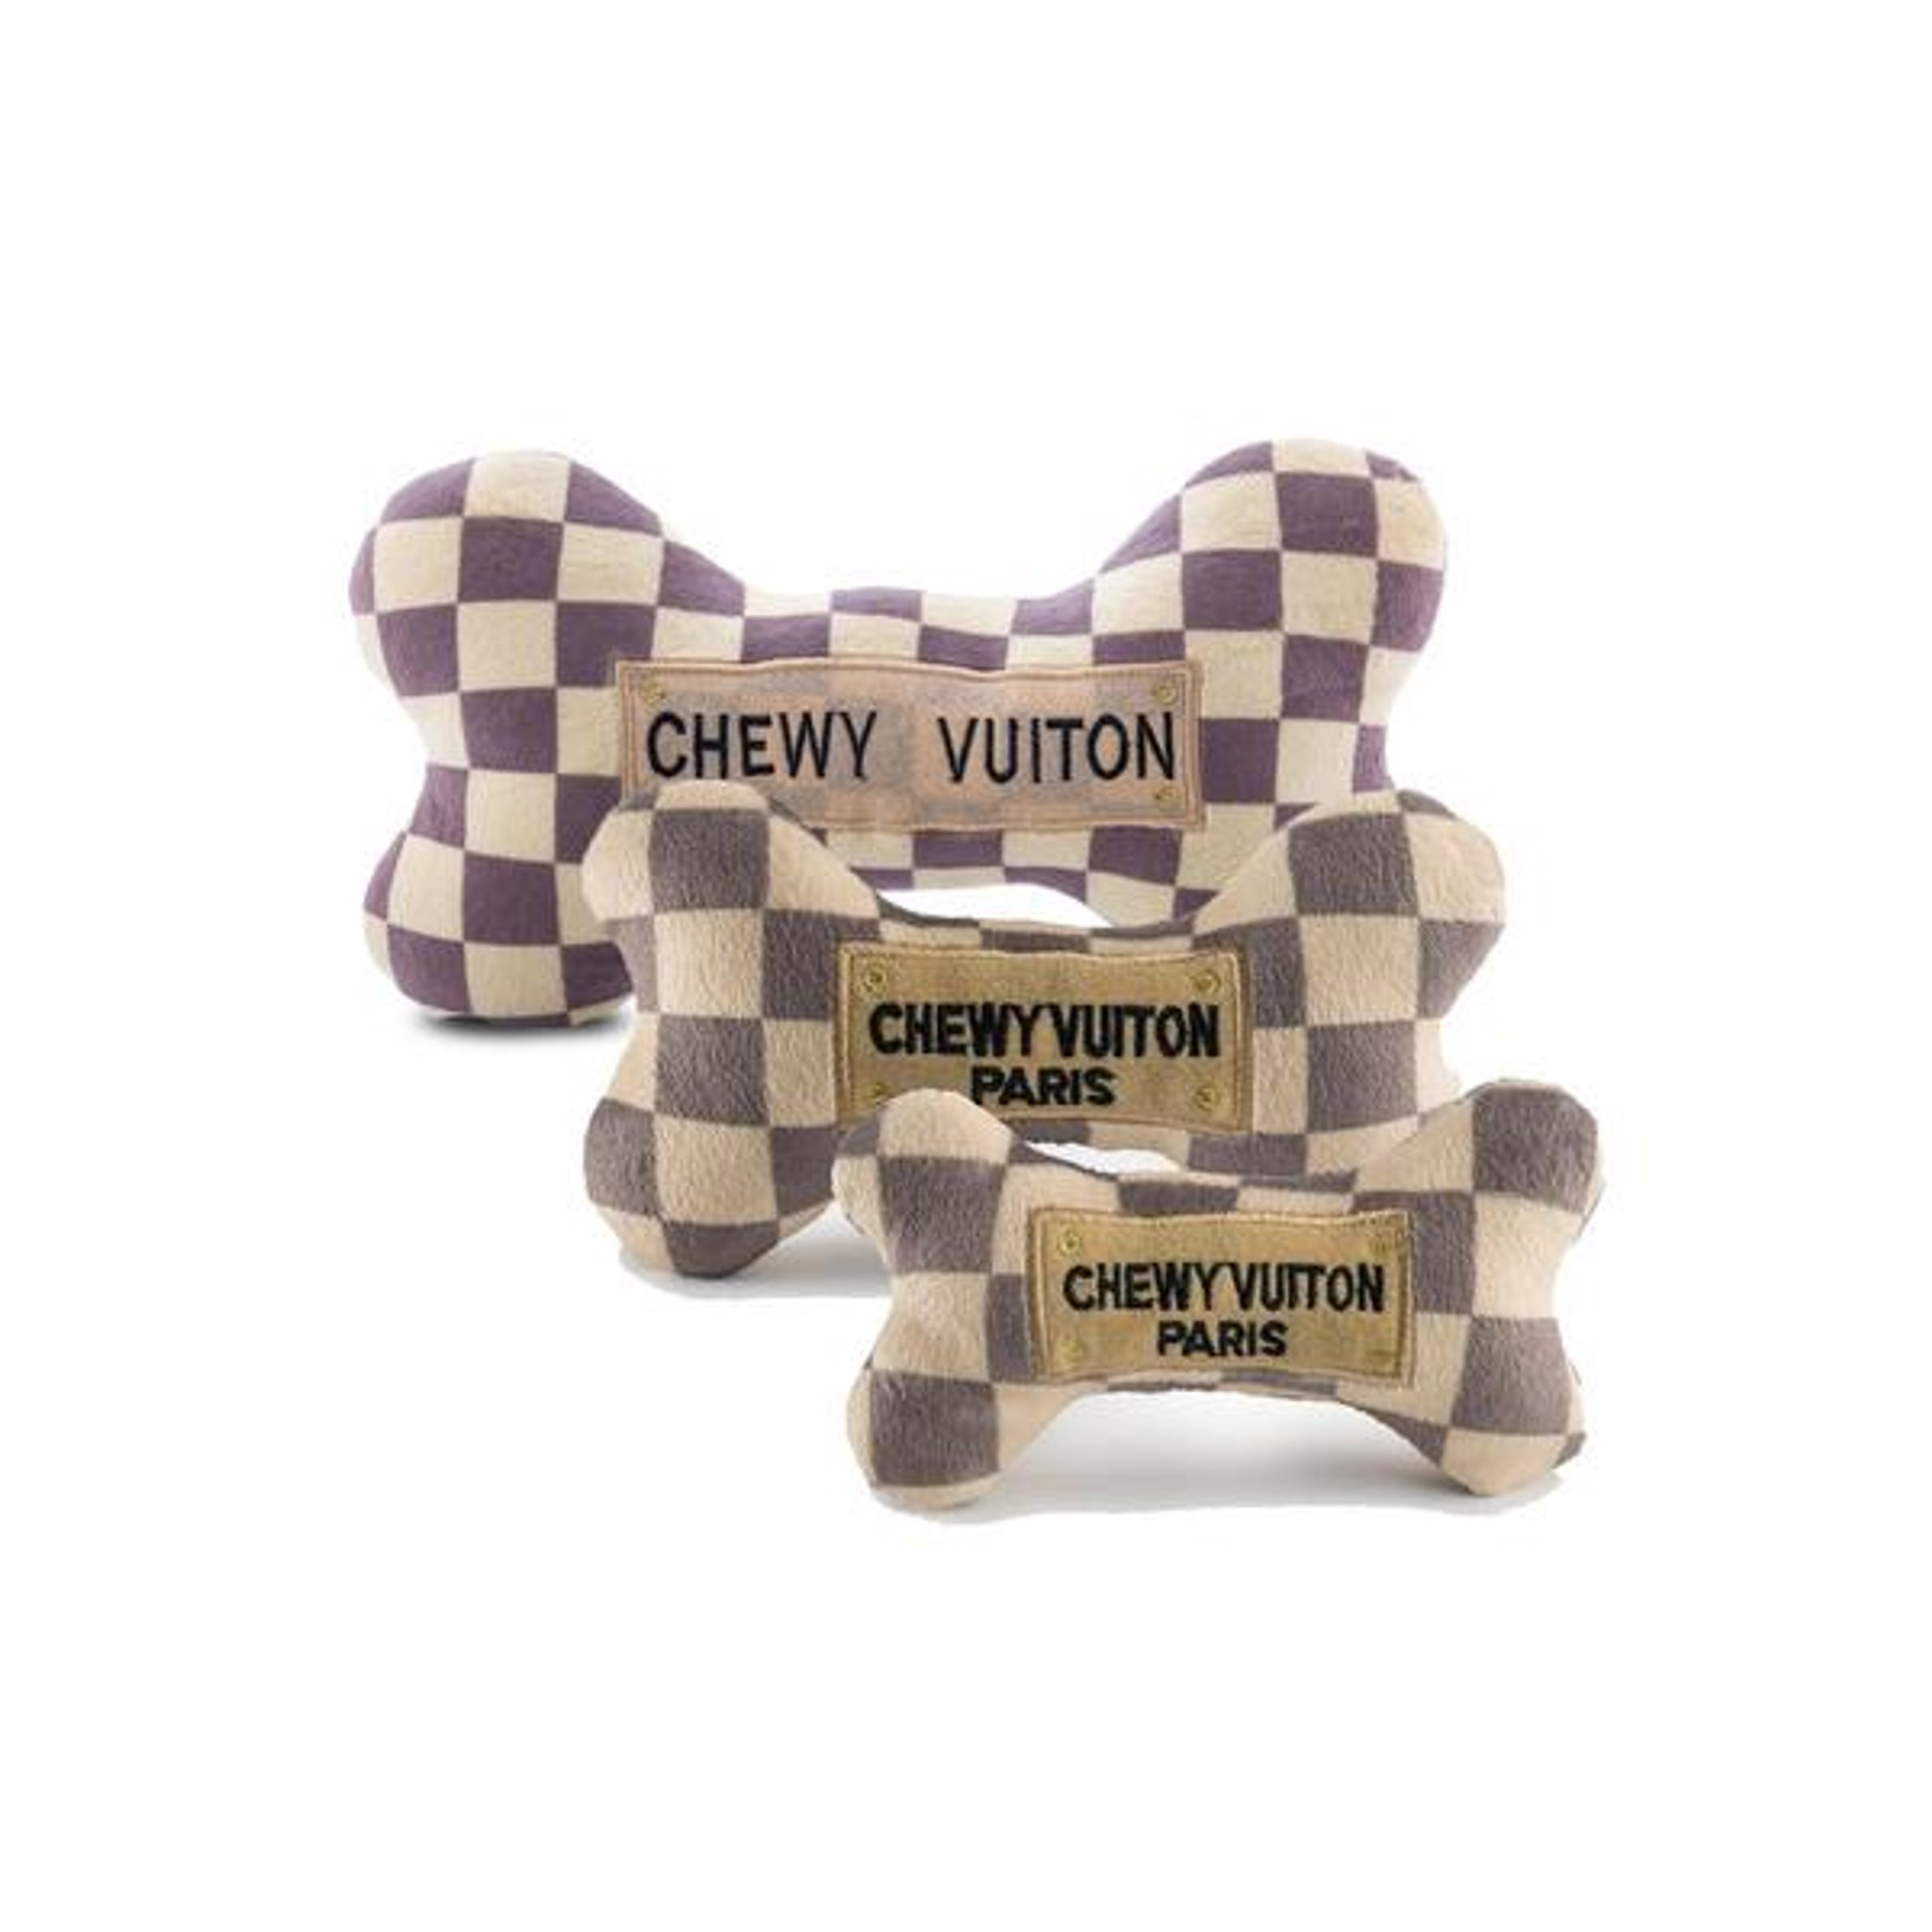 Chewy Vuiton Ball Toy